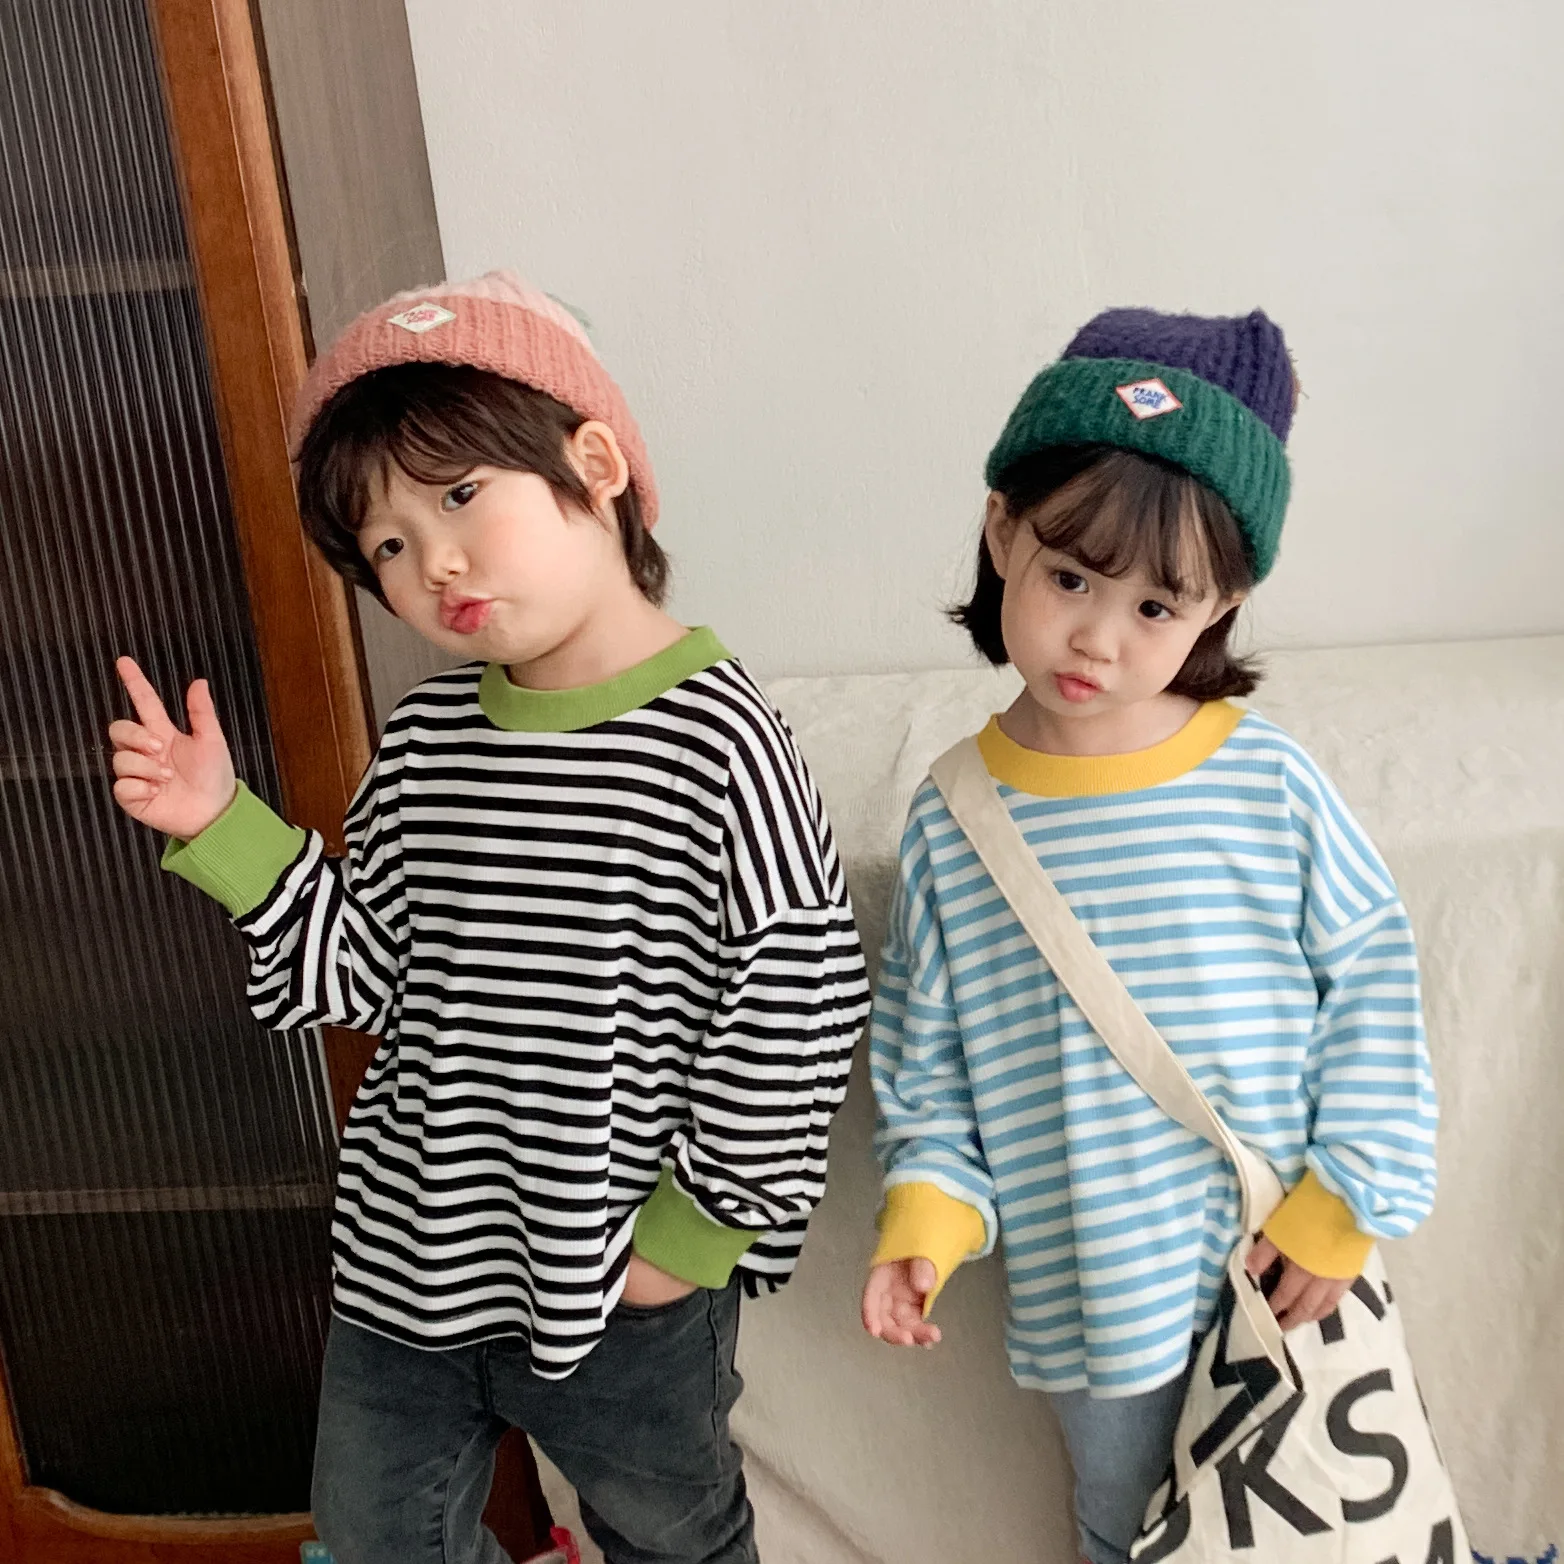 

Korean 2022 Sleeve And Children's Girls And Color Boys Autumn Spring Casual Shirt Long T-shirt Stripe Loose